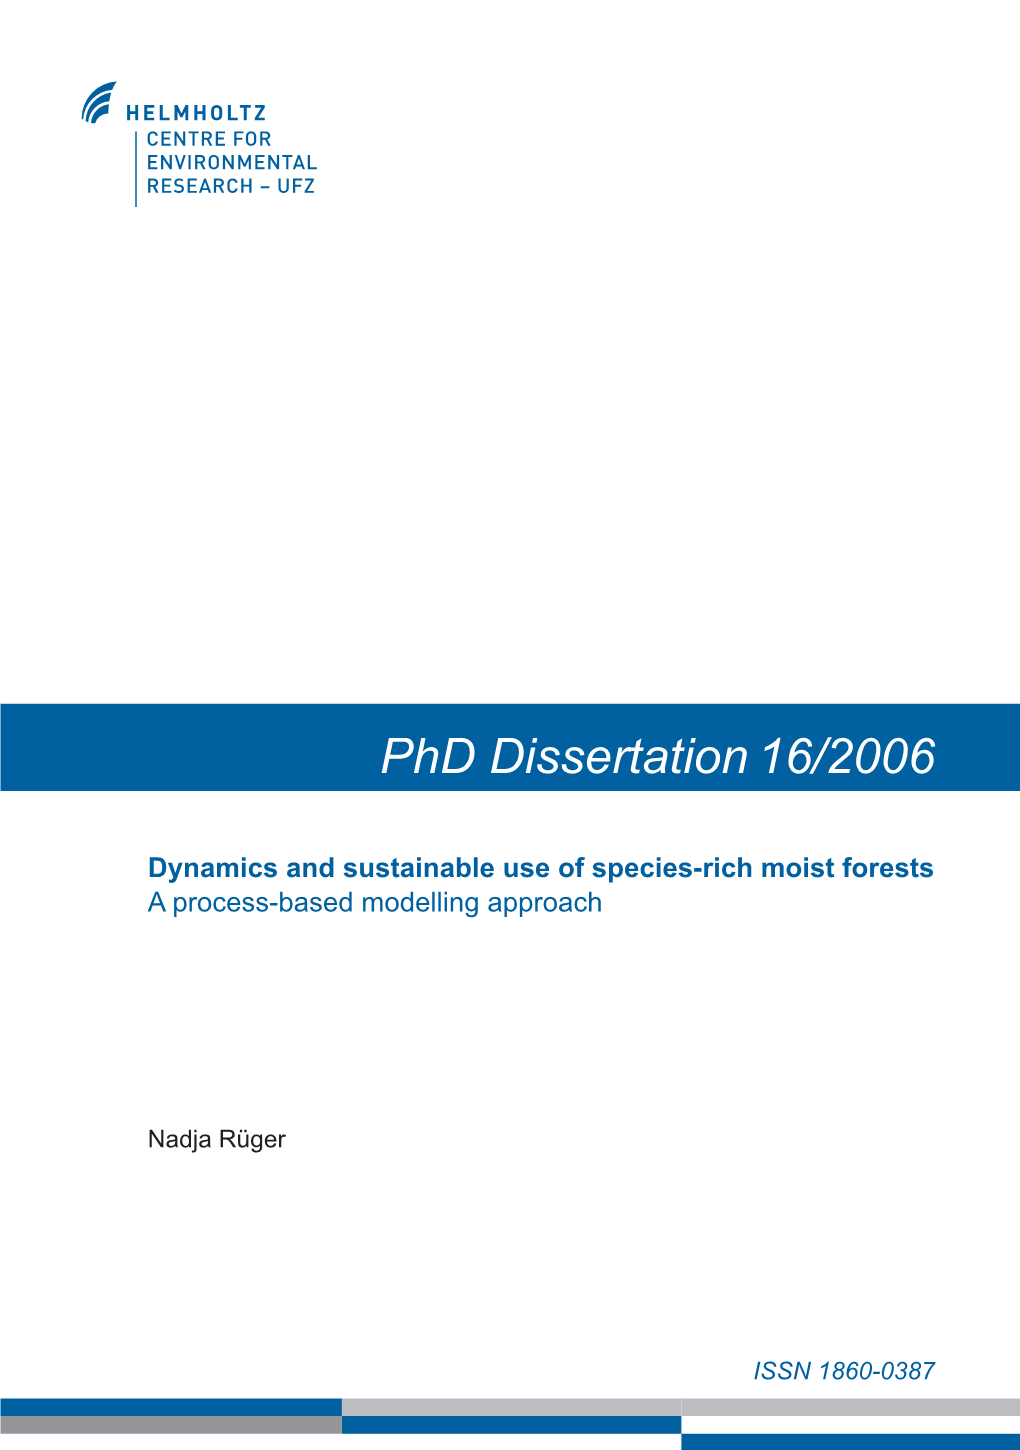 Dynamics and Sustainable Use of Species-Rich Moist Forests a Process-Based Modelling Approach